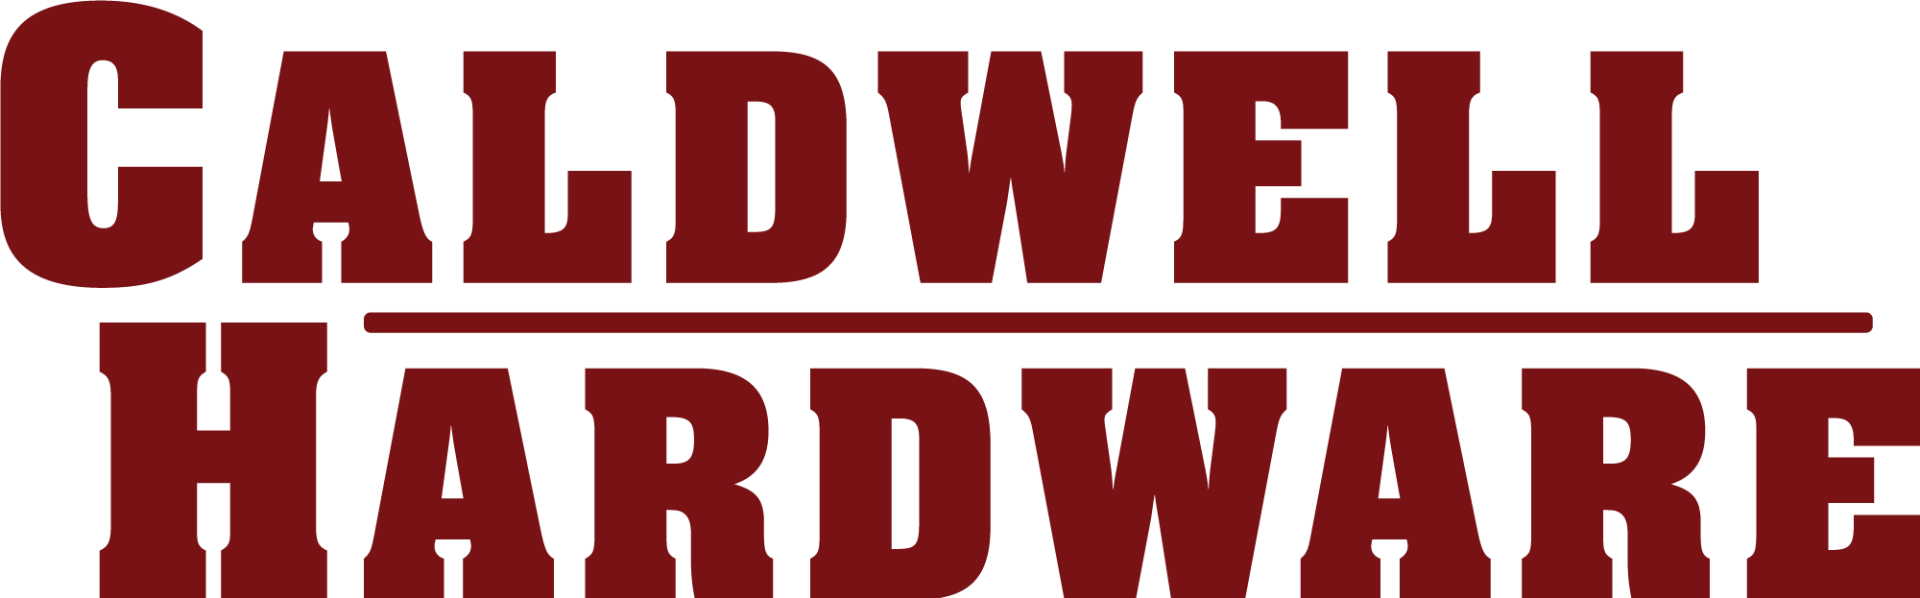 The logo for caldwell hardware is red on a white background.